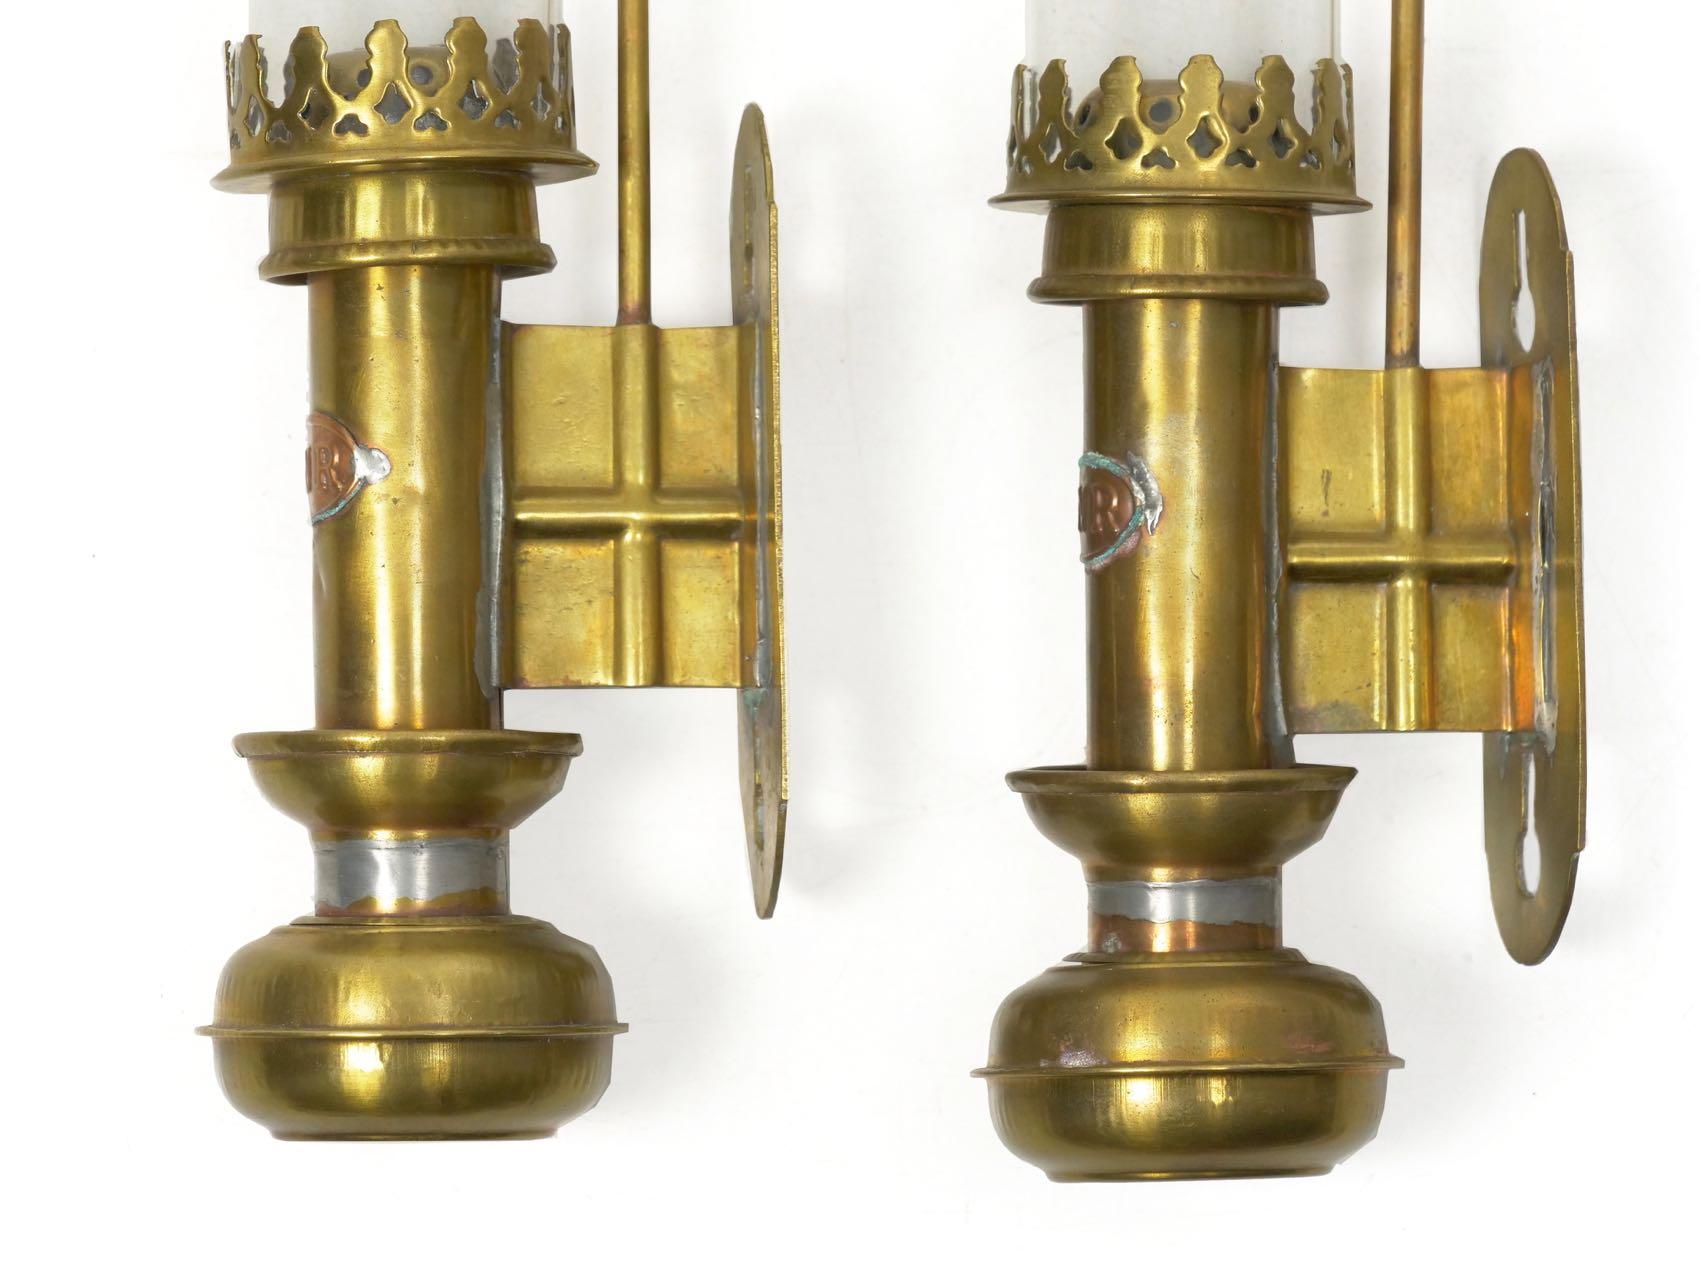 Pair of Antique Brass and Glass Railway Carriage Candle Light Lamps 2